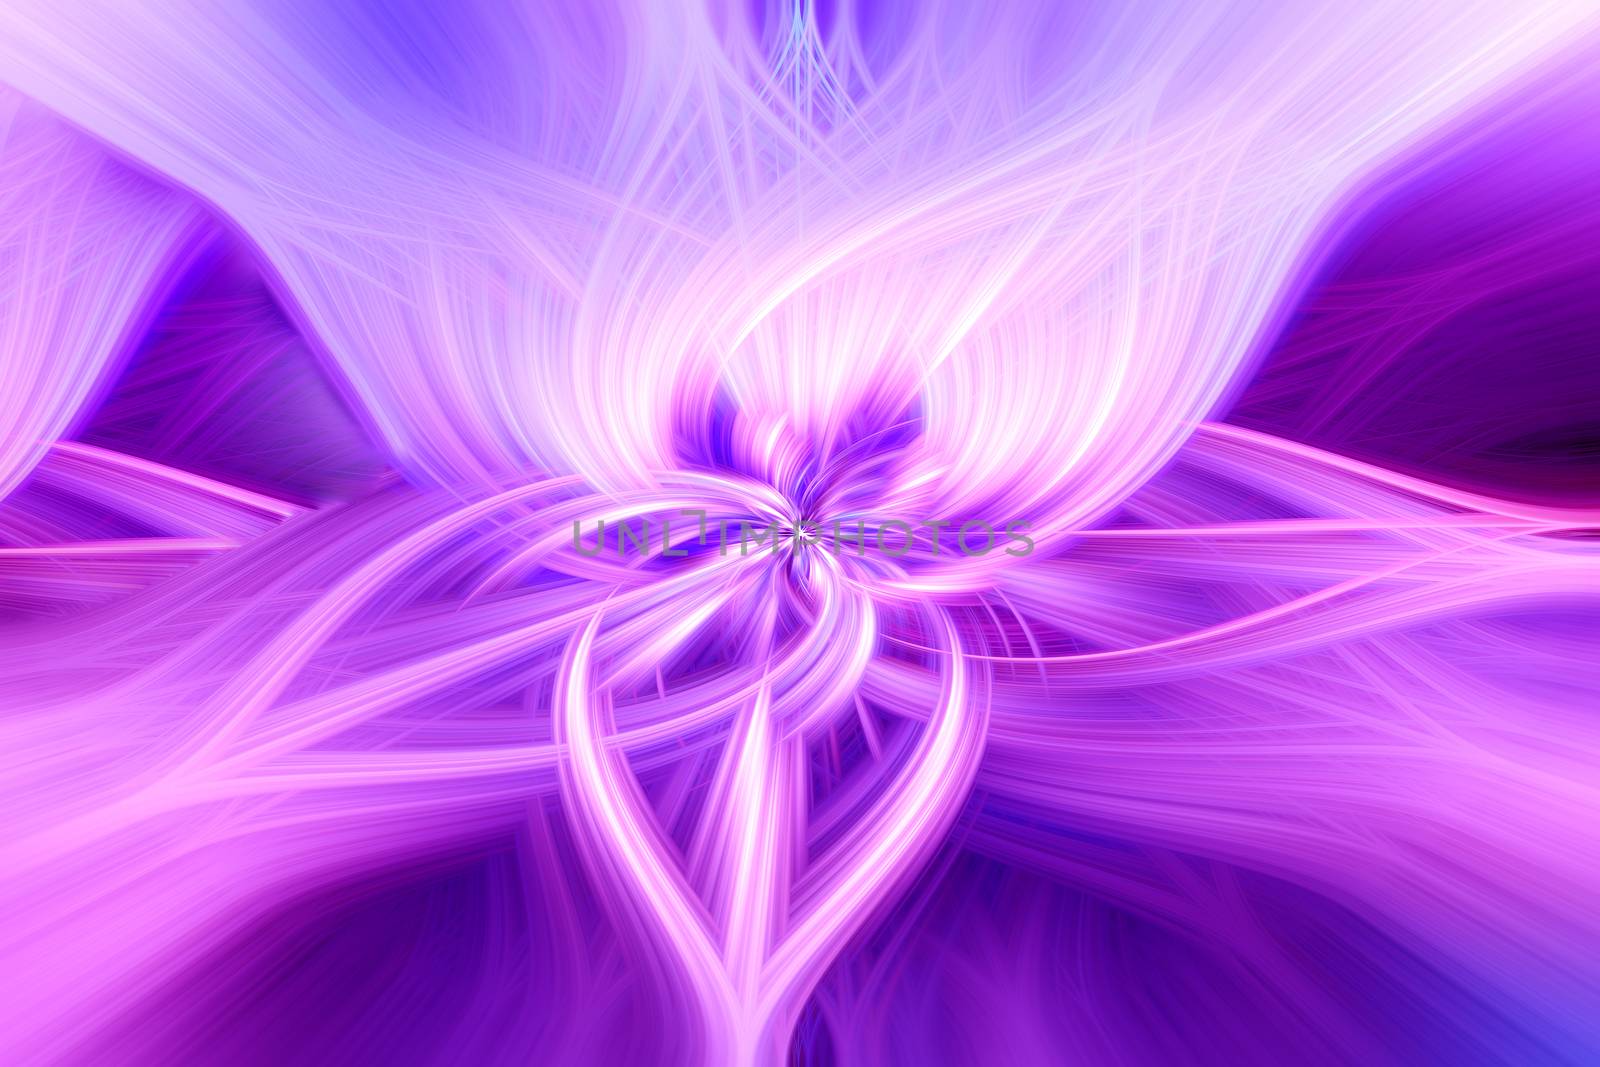 Beautiful abstract intertwined 3d fibers forming an ornament made of various shapes. Pink, purple, and blue colors. Illustration.